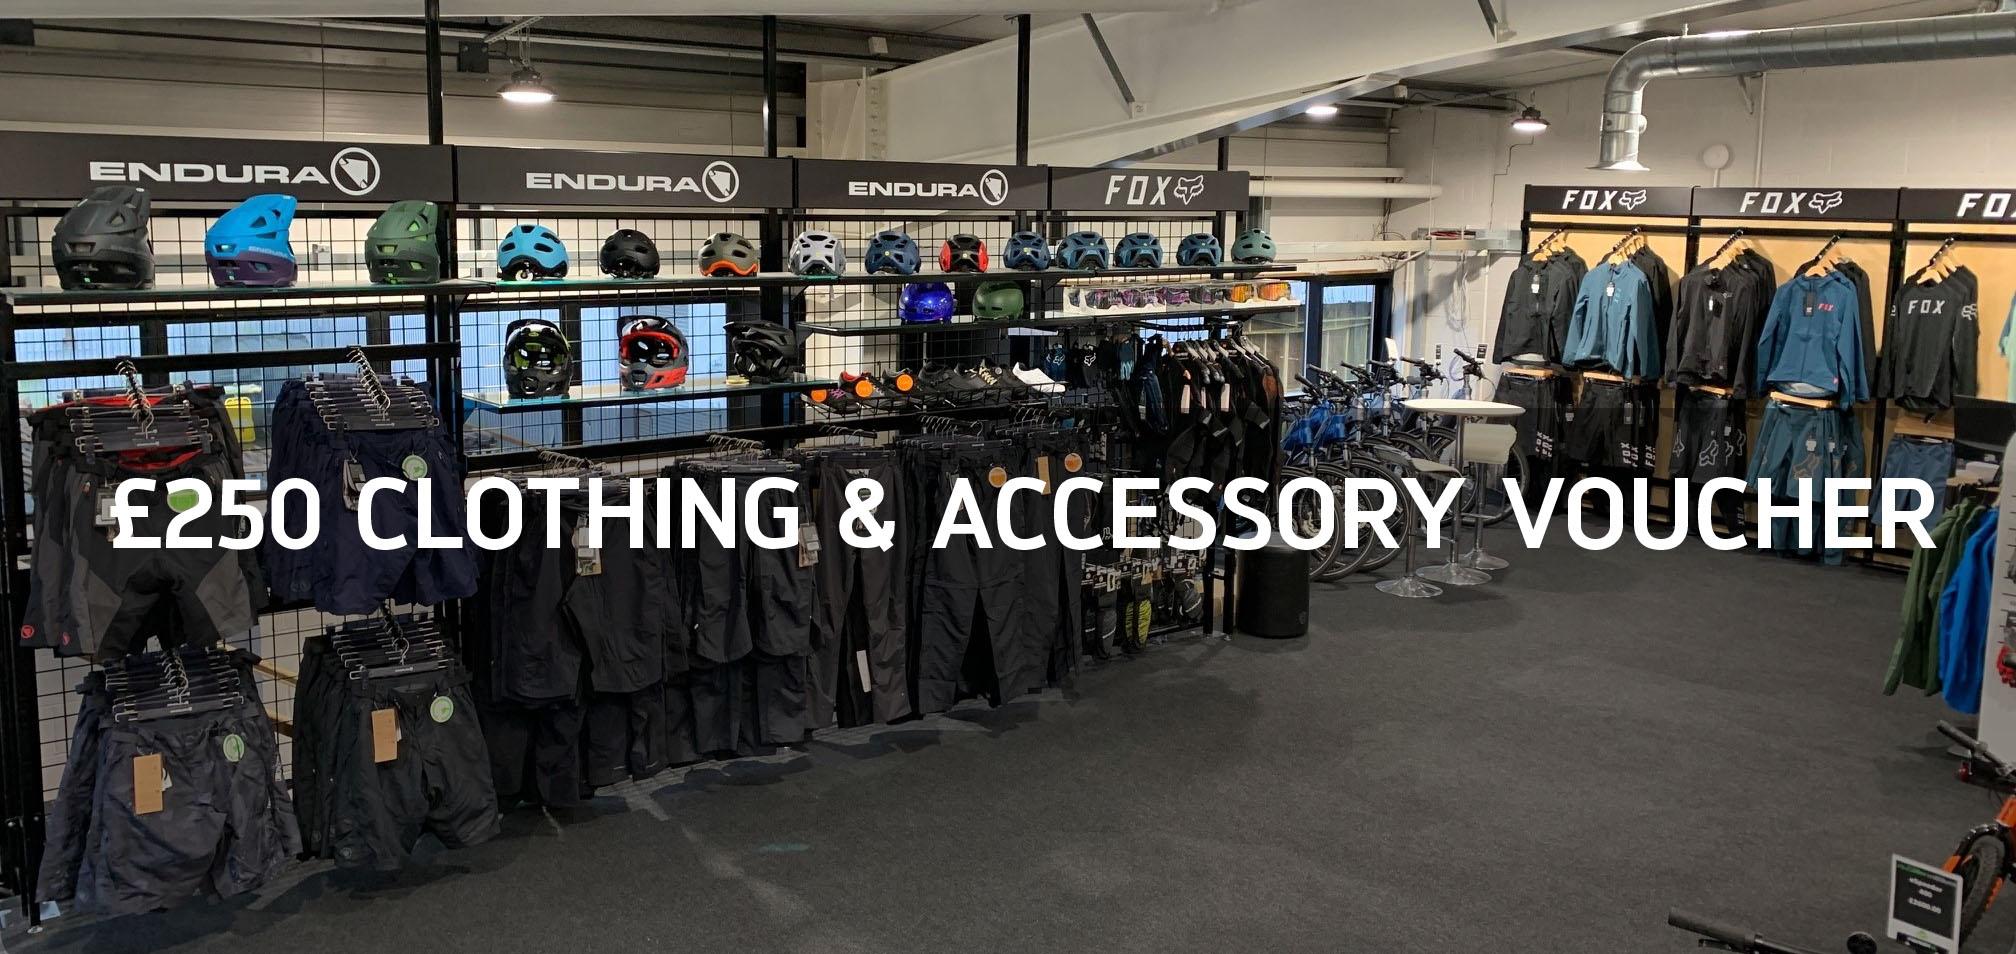 £250 CLOTHING & ACCESSORY VOUCHER